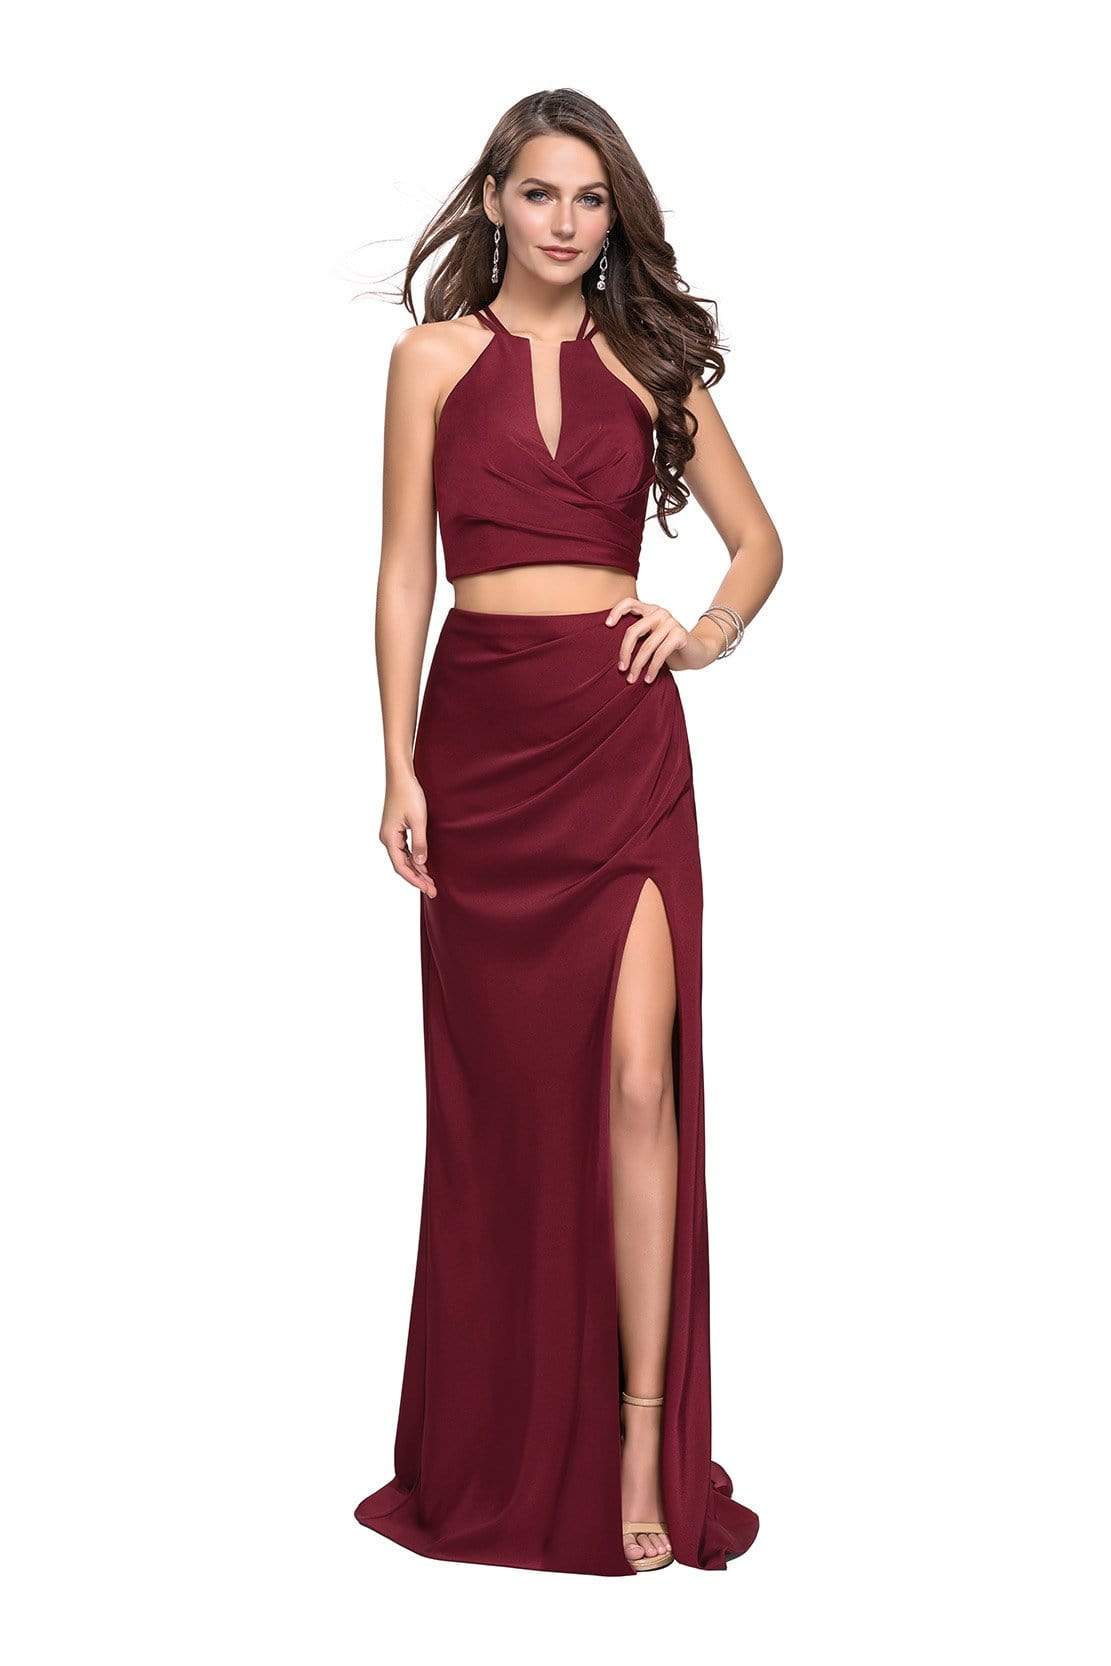 La Femme - Two Piece Deep V-neck Ruched Sheath Dress 25731SC - 1 pc Burgundy In Size 0 Available CCSALE 0 / Burgundy